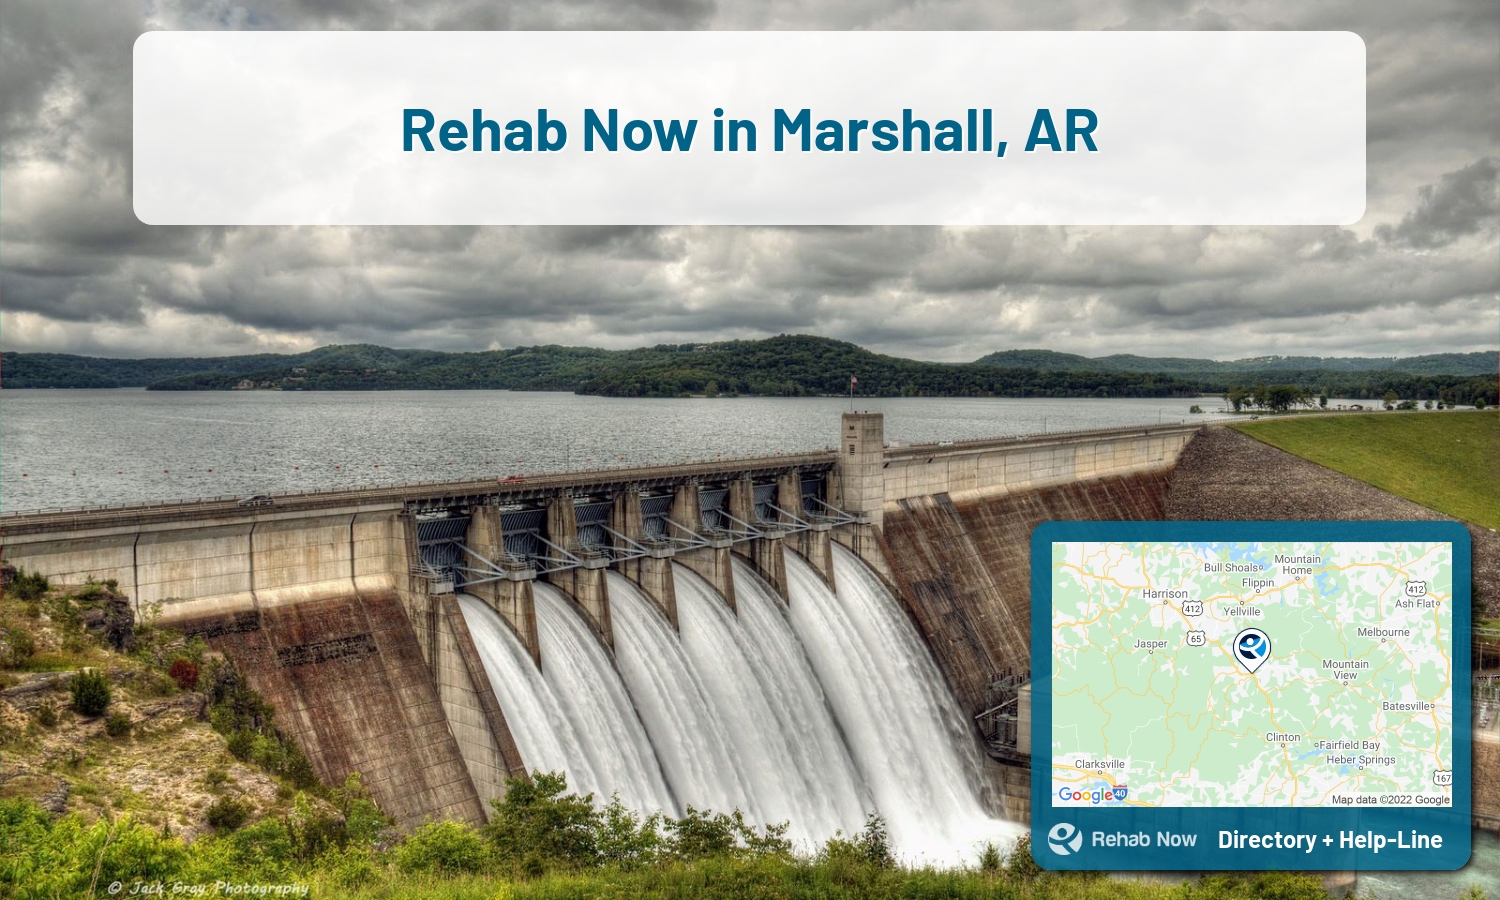 Drug rehab and alcohol treatment services nearby Marshall, AR. Need help choosing a treatment program? Call our free hotline!